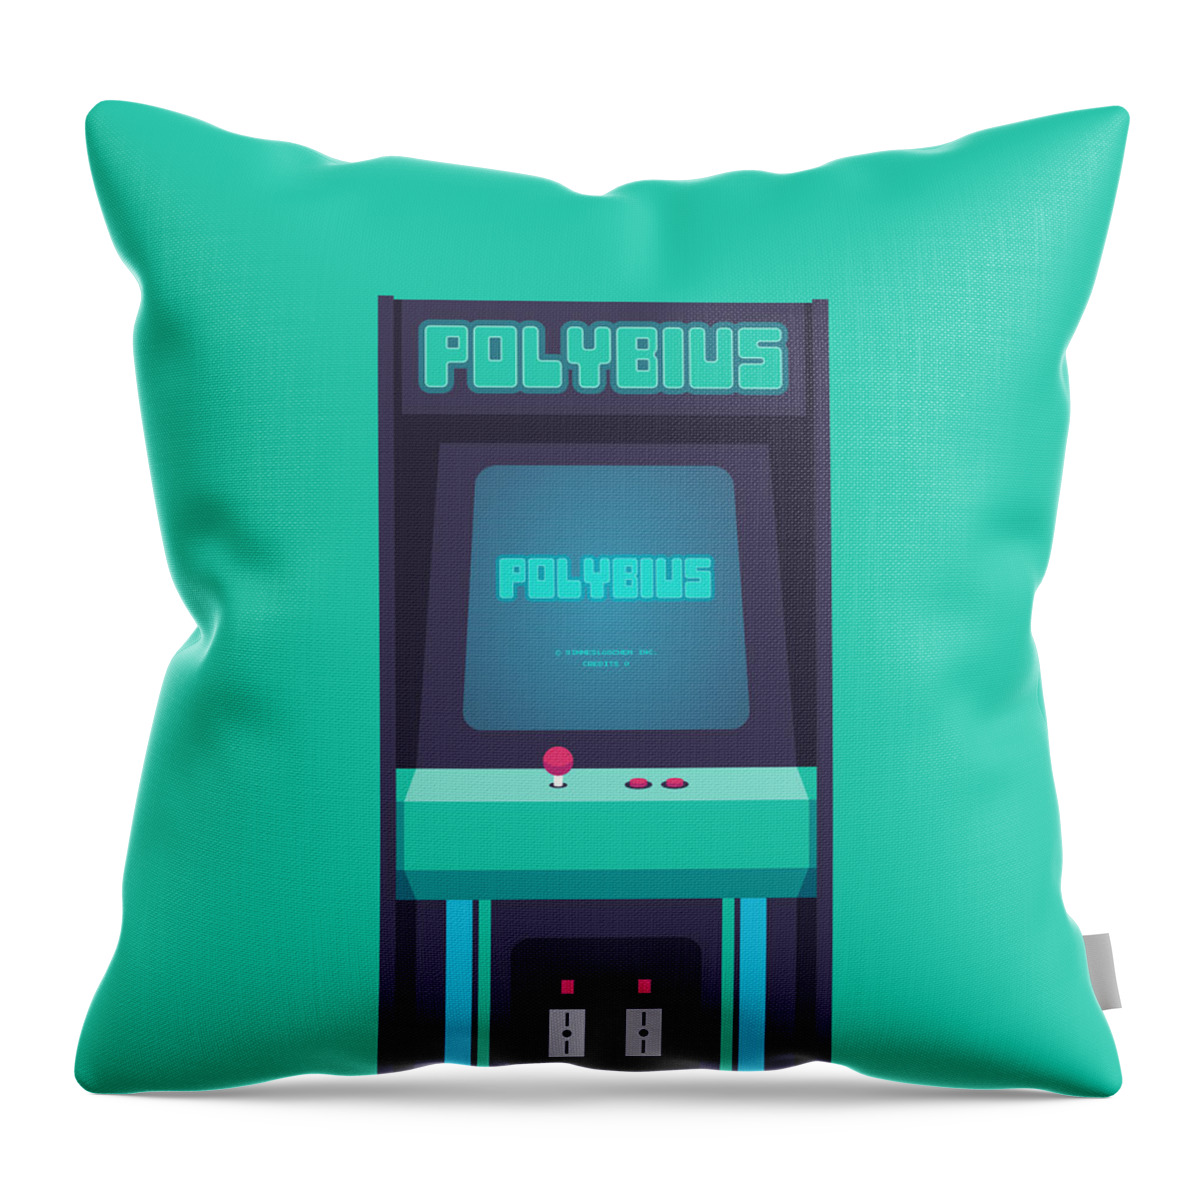 Polybius Throw Pillow featuring the digital art Polybius Arcade Game Machine Cabinet - Front Green by Organic Synthesis